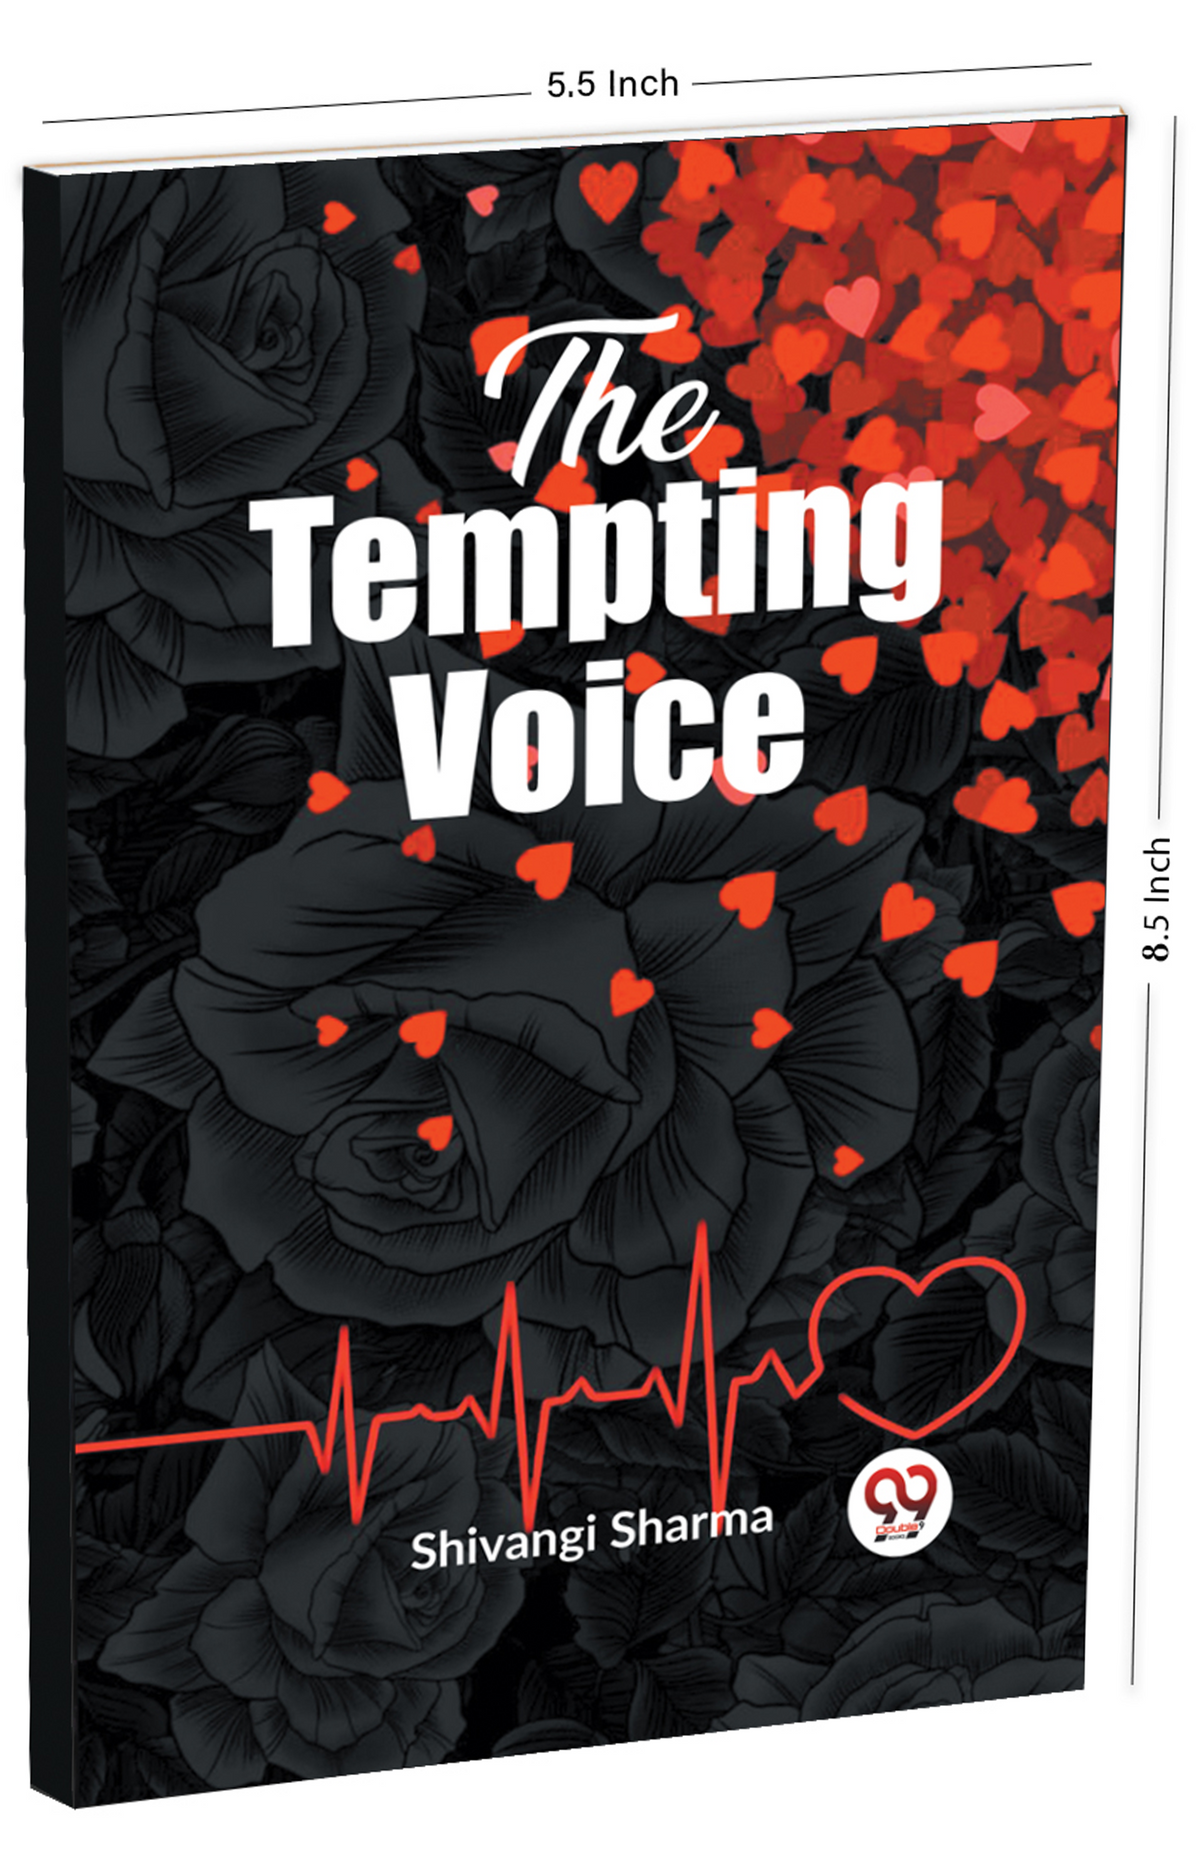 The Tempting Voice